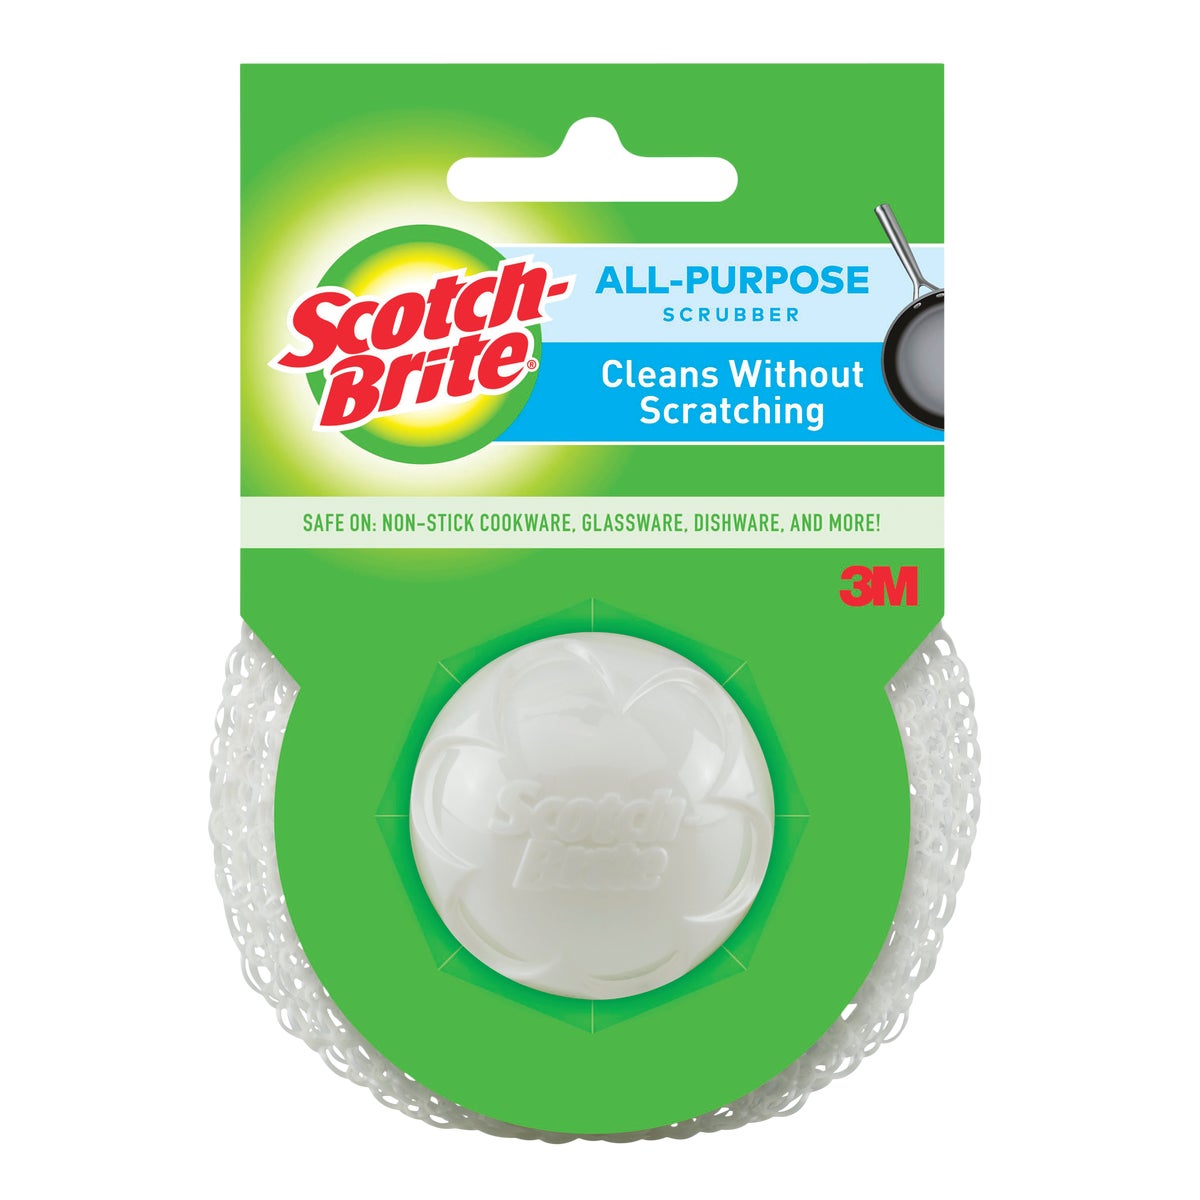 Item 600943, As cleaning tool experts for over 50 years, Scotch Brite Brand is the only 